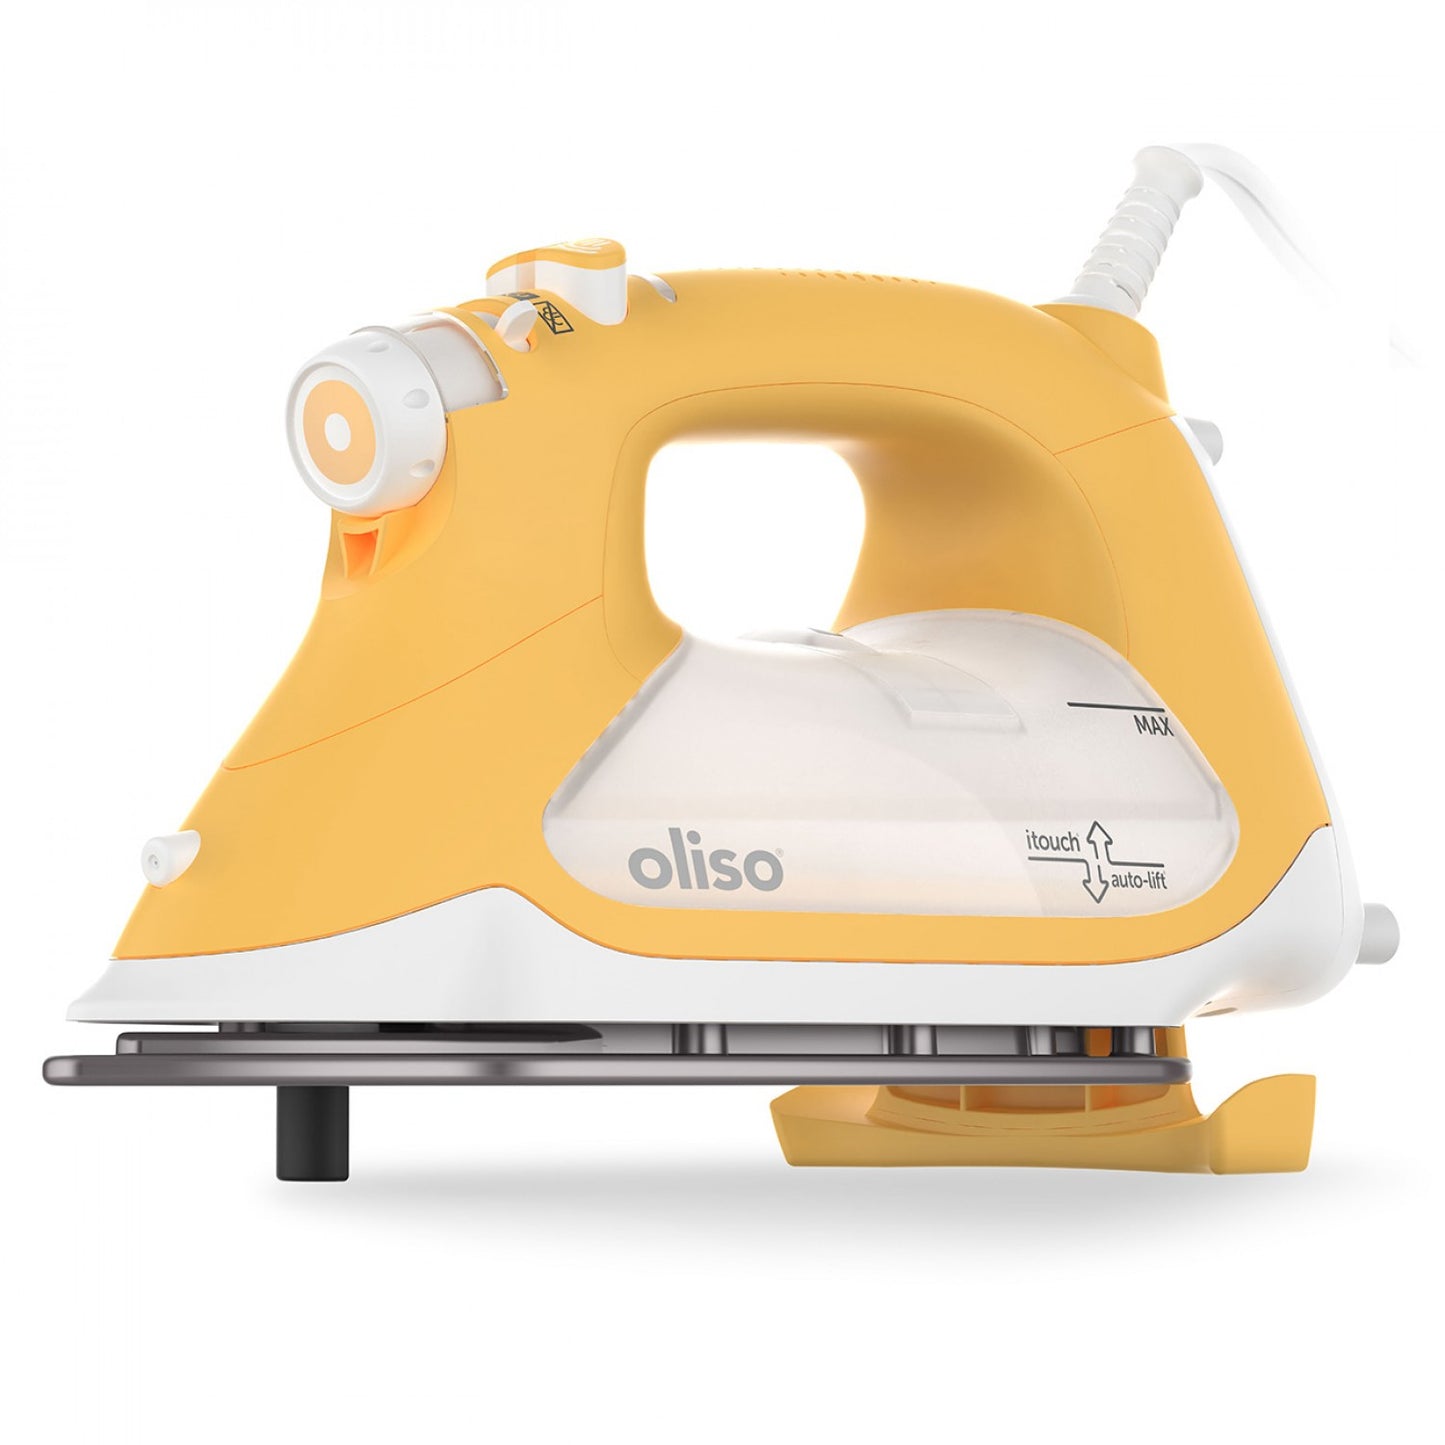 Oliso’s iconic SmartIron just got smarter! The new TG1600Pro Plus still features Oliso’s most-loved patented iTouch technology. Simply touch the handle and the iron lowers, ready to work. Take your hand off and the patented scorch guards lift the iron off the board preventing scorches, burns, and tipping. It’s not only safer, but it also saves time as well as your wrists!